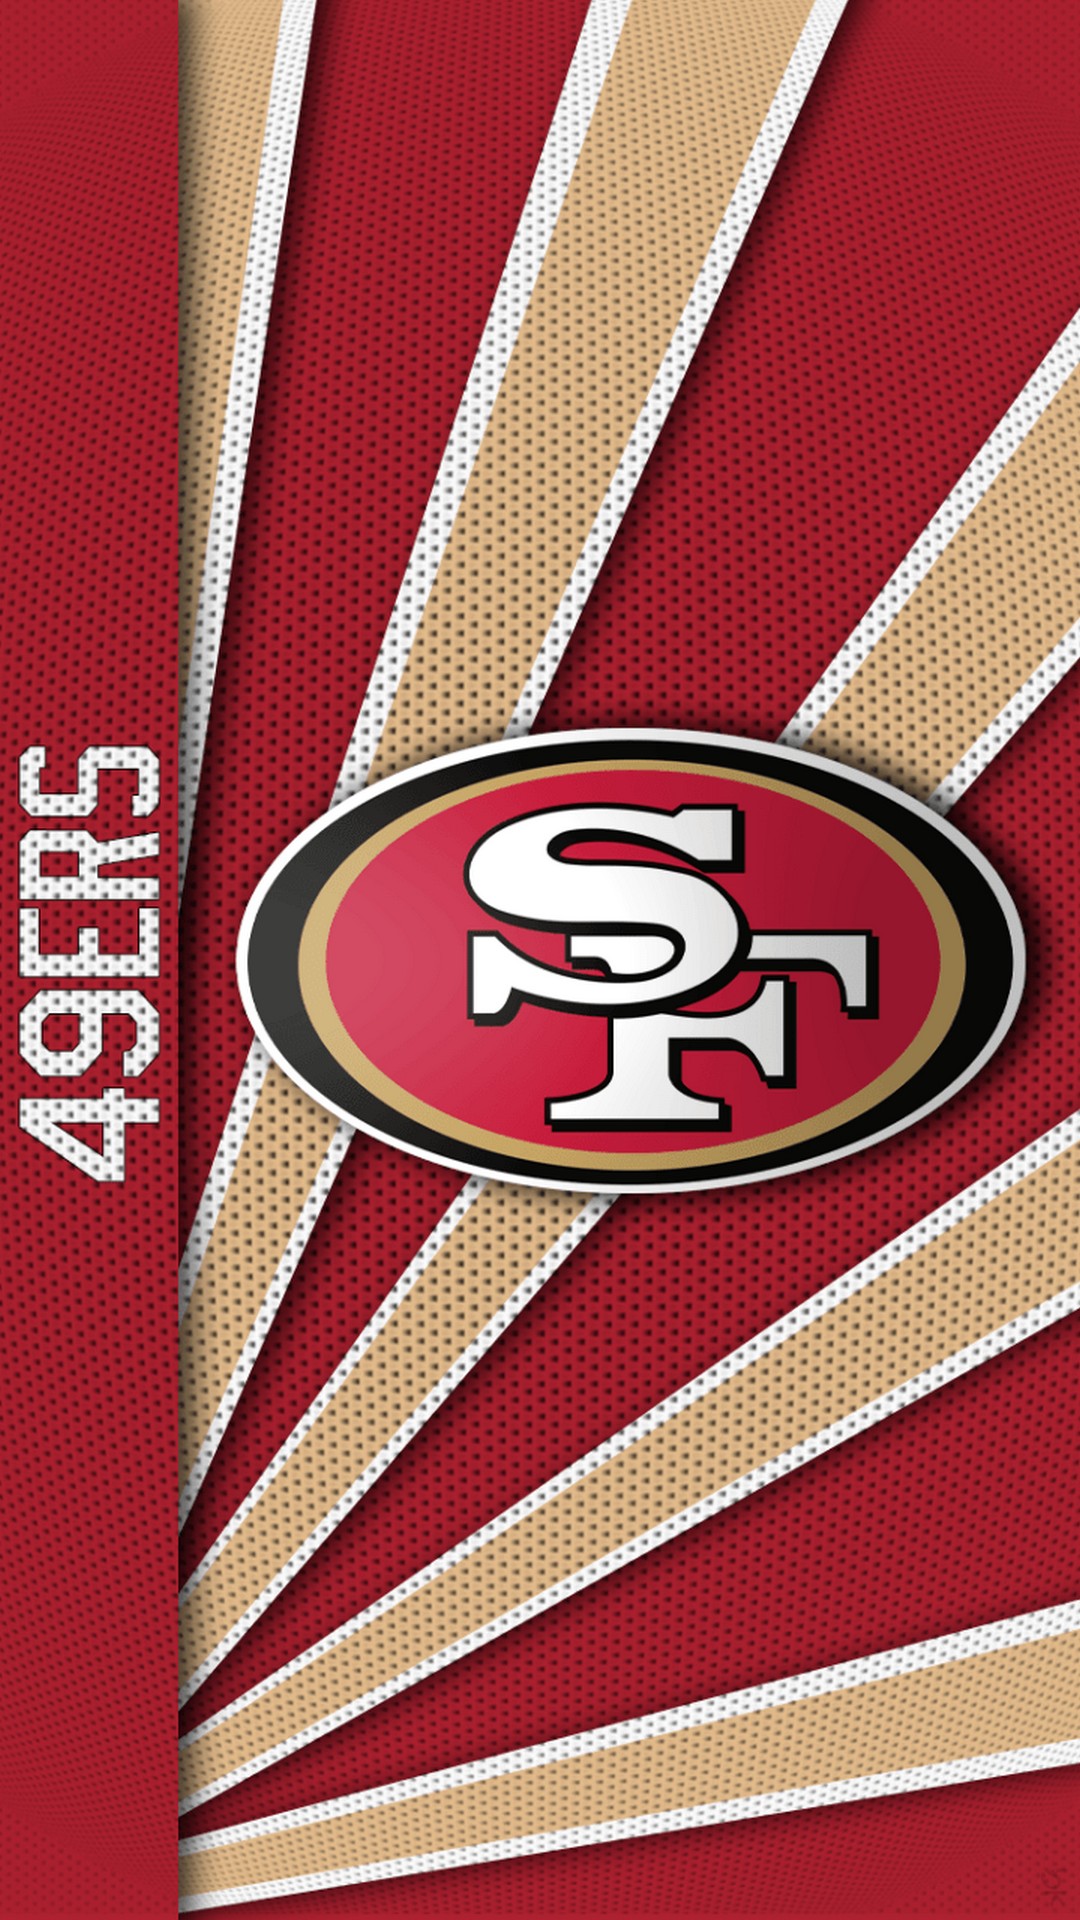 San Francisco 49ers Wallpaper iPhone With high-resolution 1080X1920 pixel. You can use this wallpaper for your iPhone 5, 6, 7, 8, X, XS, XR backgrounds, Mobile Screensaver, or iPad Lock Screen